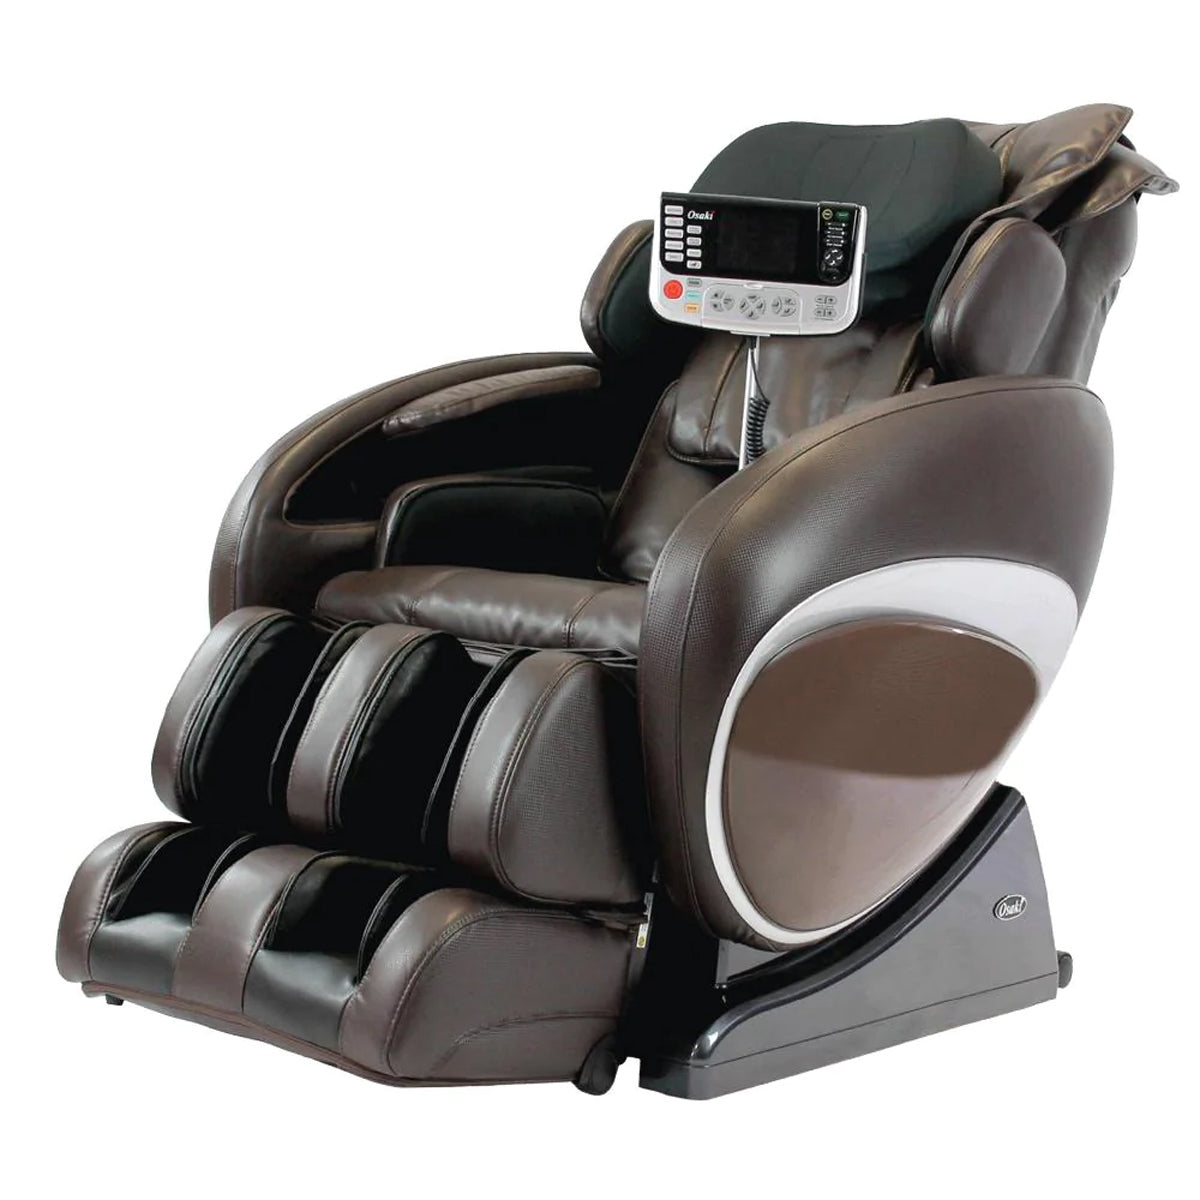 Tabitha Brown - Friends, Fans & Family Invitation Massage Chair Pricing